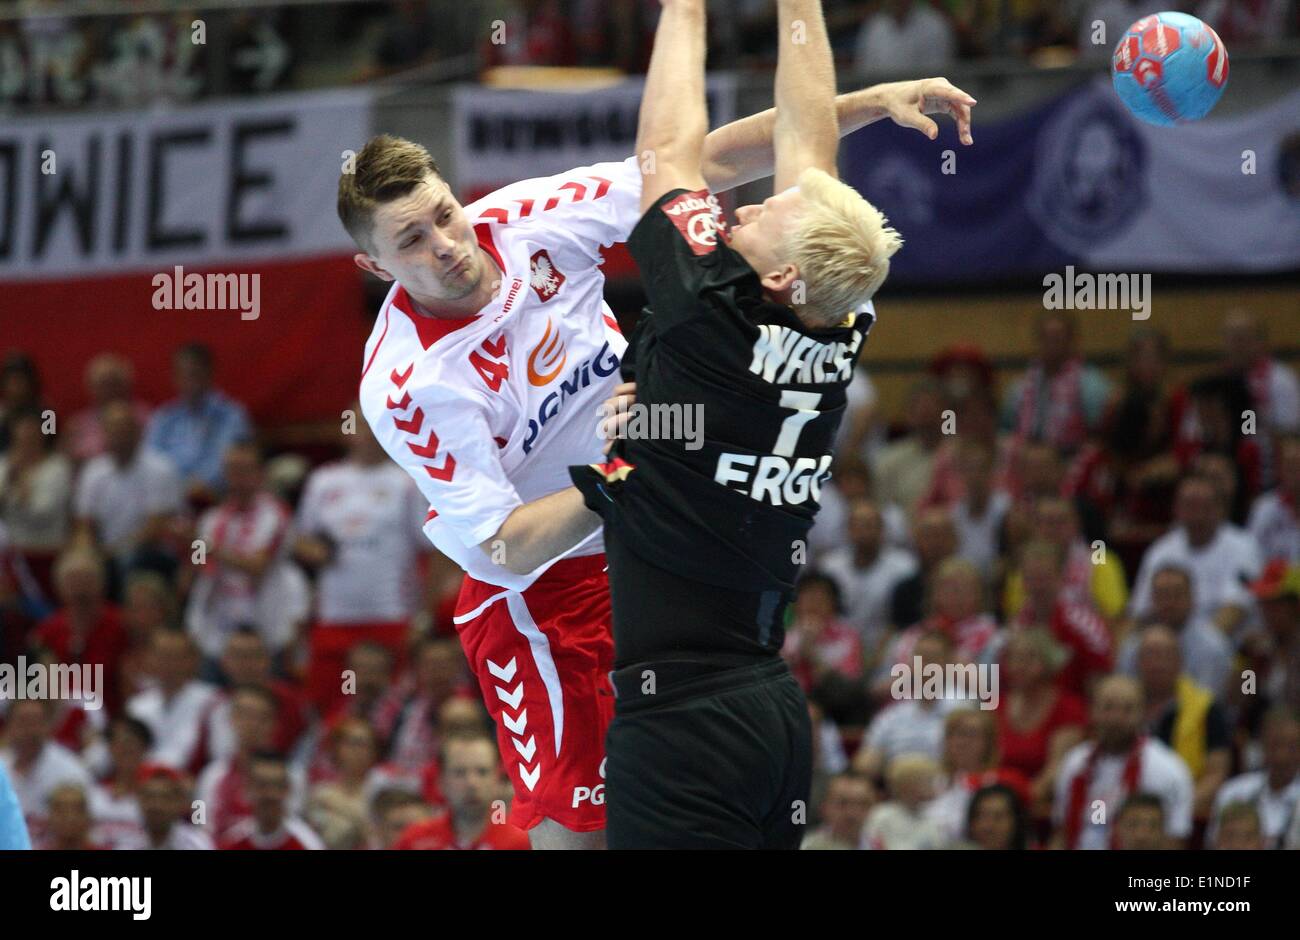 Gdansk, Poland 7th, June 2014 Quatar 2015 Men's World Handball Championship Play Off game between Poland and Germany at ERGO Arena sports hall. Michal Szyba (45) in action during the game. Credit:  Michal Fludra/Alamy Live News Stock Photo